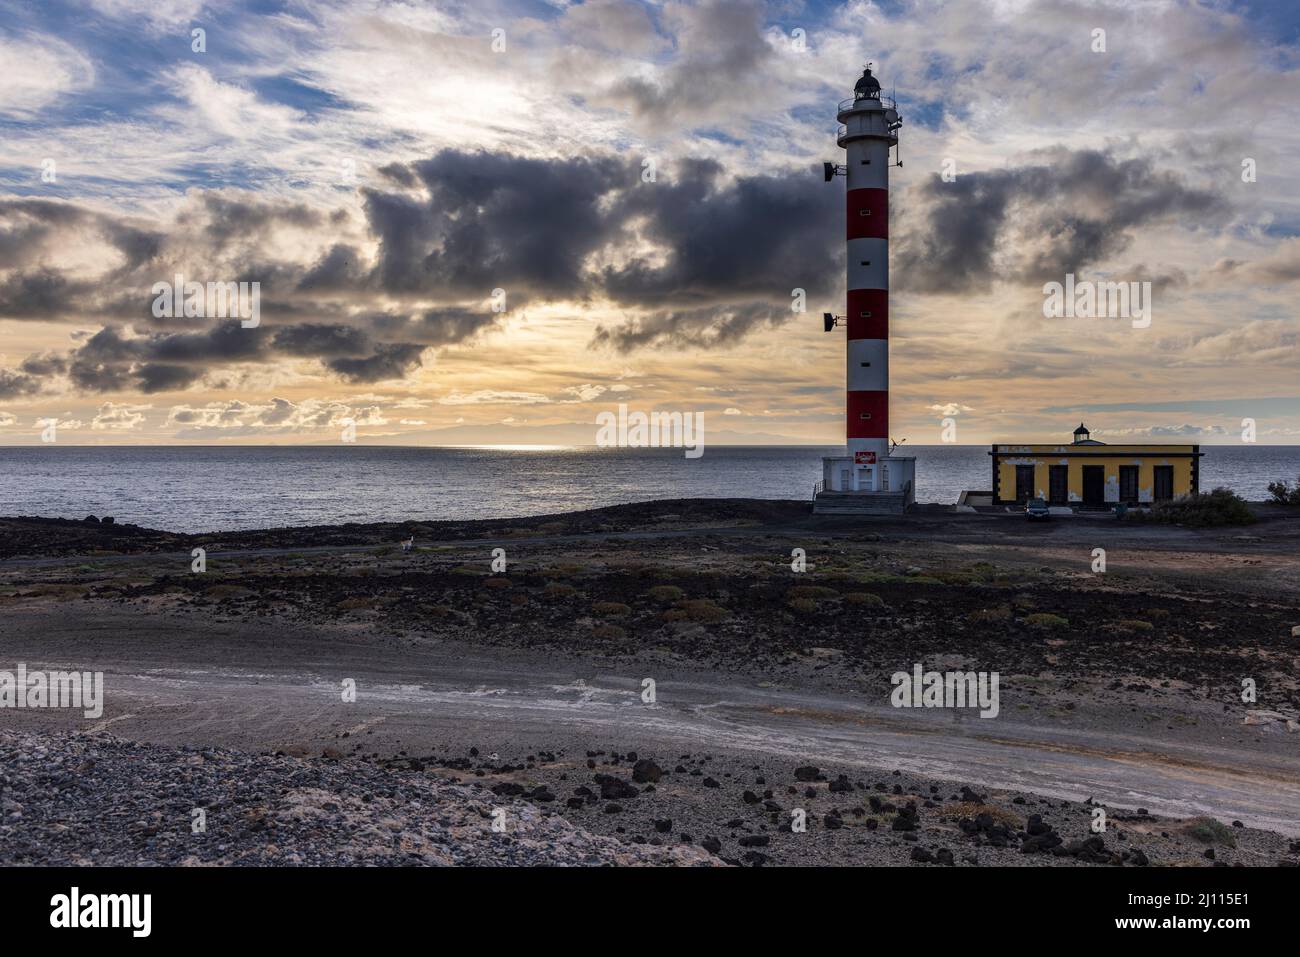 The new and old lighthouses on the east coast at Poris de Abona, Tenerife, Canary Islands, Spain Stock Photo